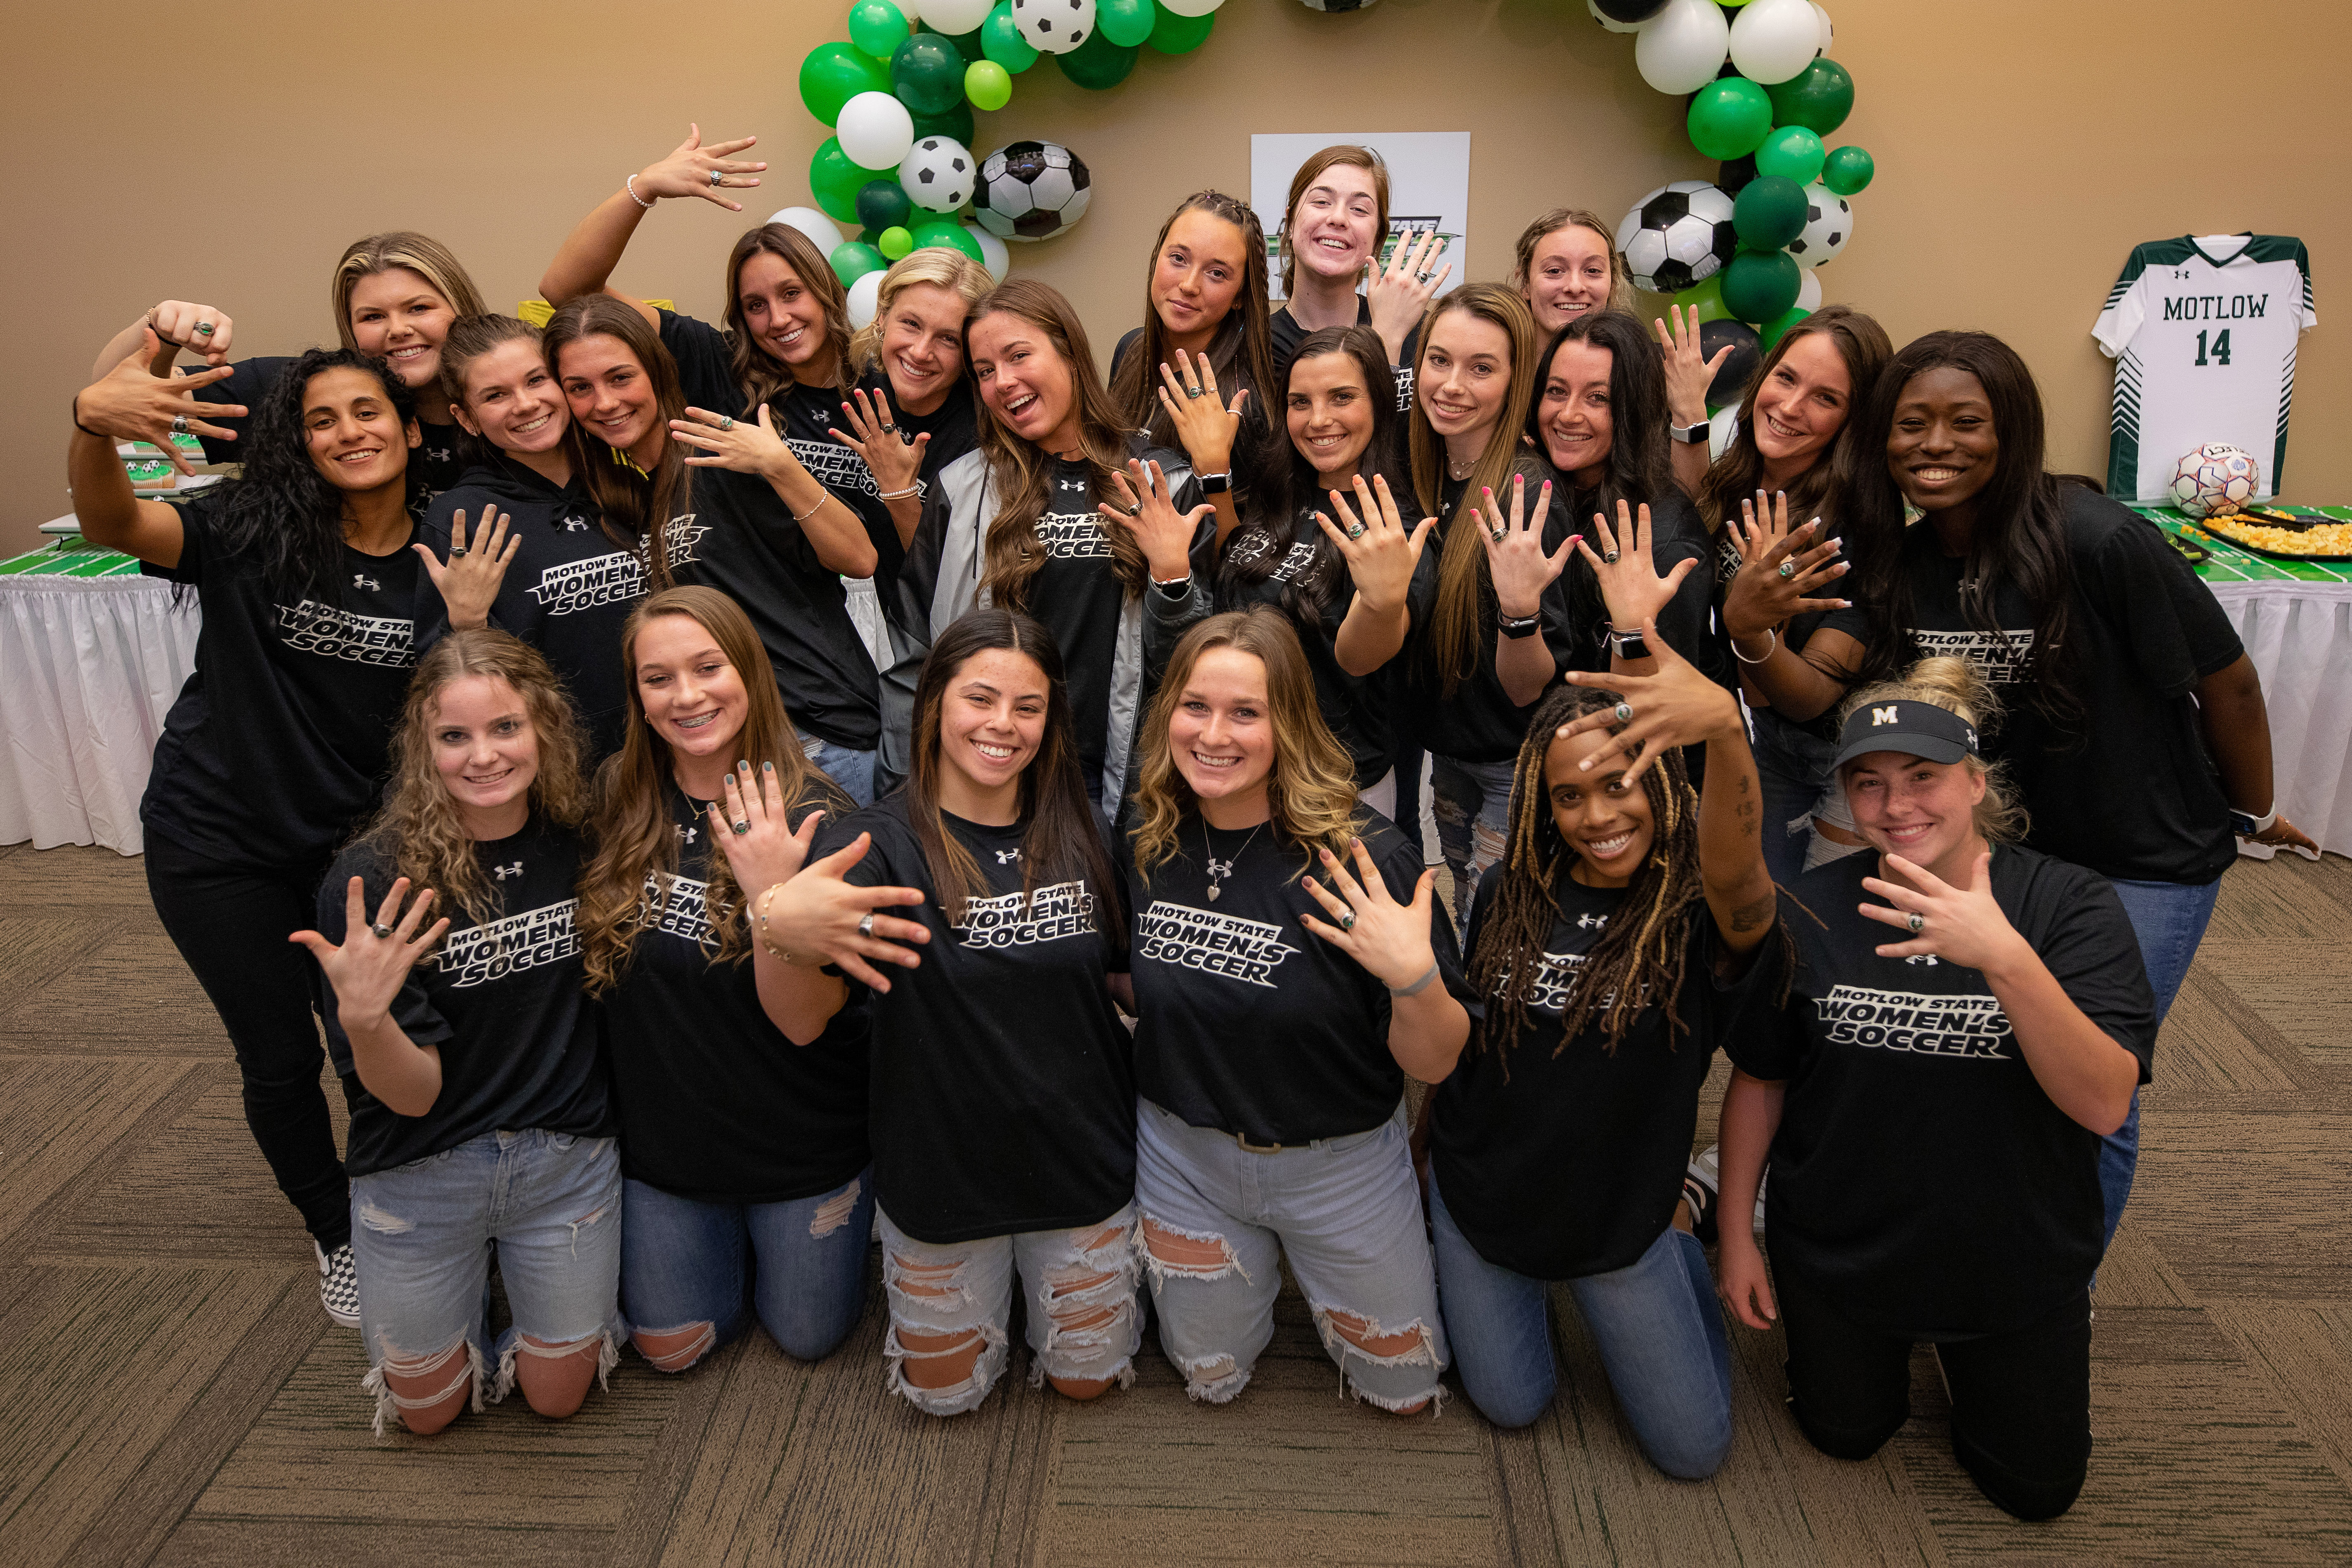 Motlow Women’s Soccer Honored with Celebration